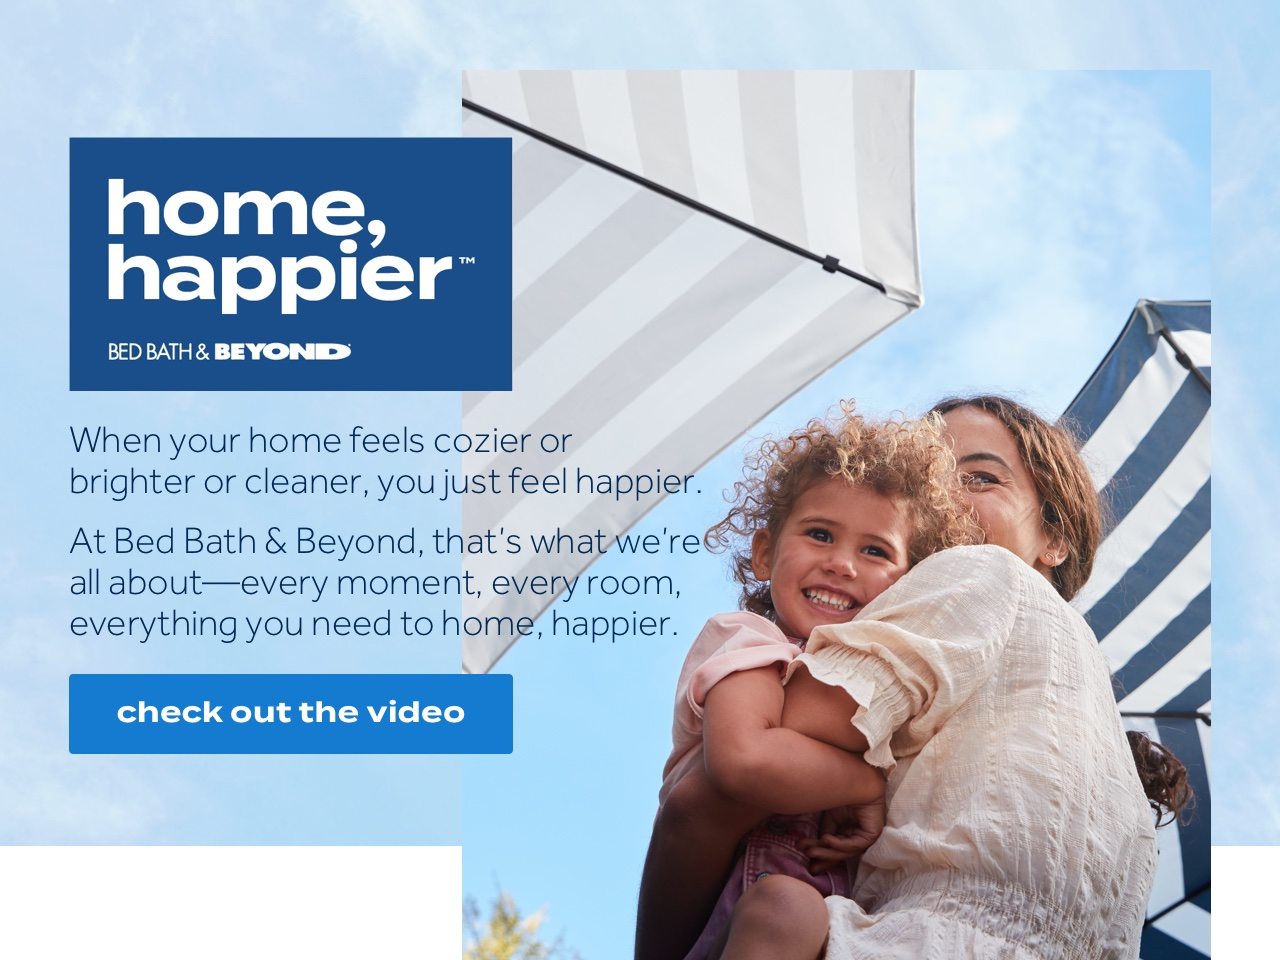 home, happier™ Bed Bath & Beyond. When your home feels cozier or brighter or cleaner, you just feel happier. At Bed Bath & Beyond, that's what we're all about -- every moment, every room, eveyrthing you need to home, happier. check out the video